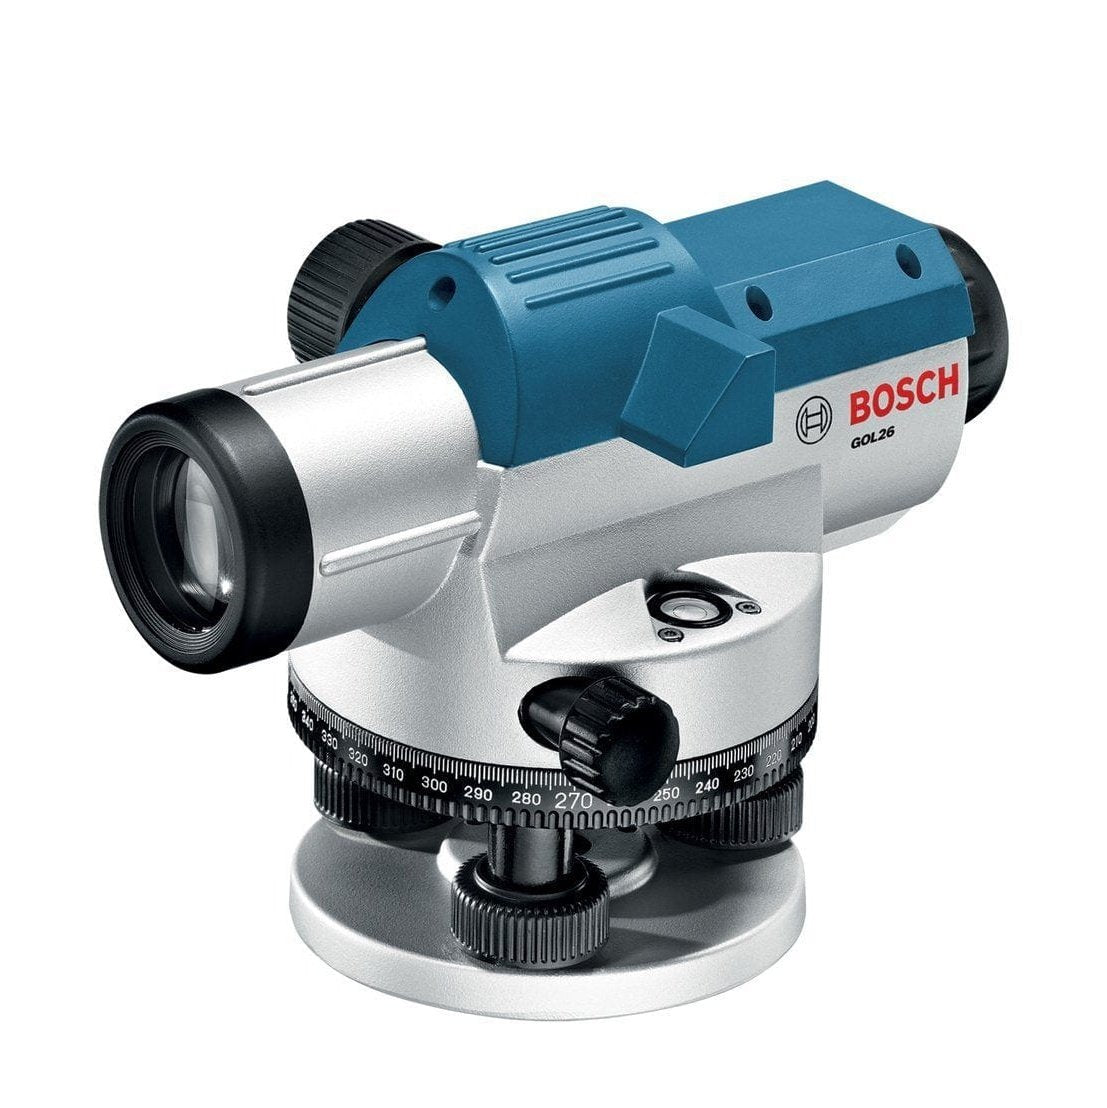 Maximize your leveling accuracy with the Bosch Professional 100m Optical Level (GOL 26 D) at SupplyMaster.store in Ghana. Digital Meter Buy Tools hardware Building materials